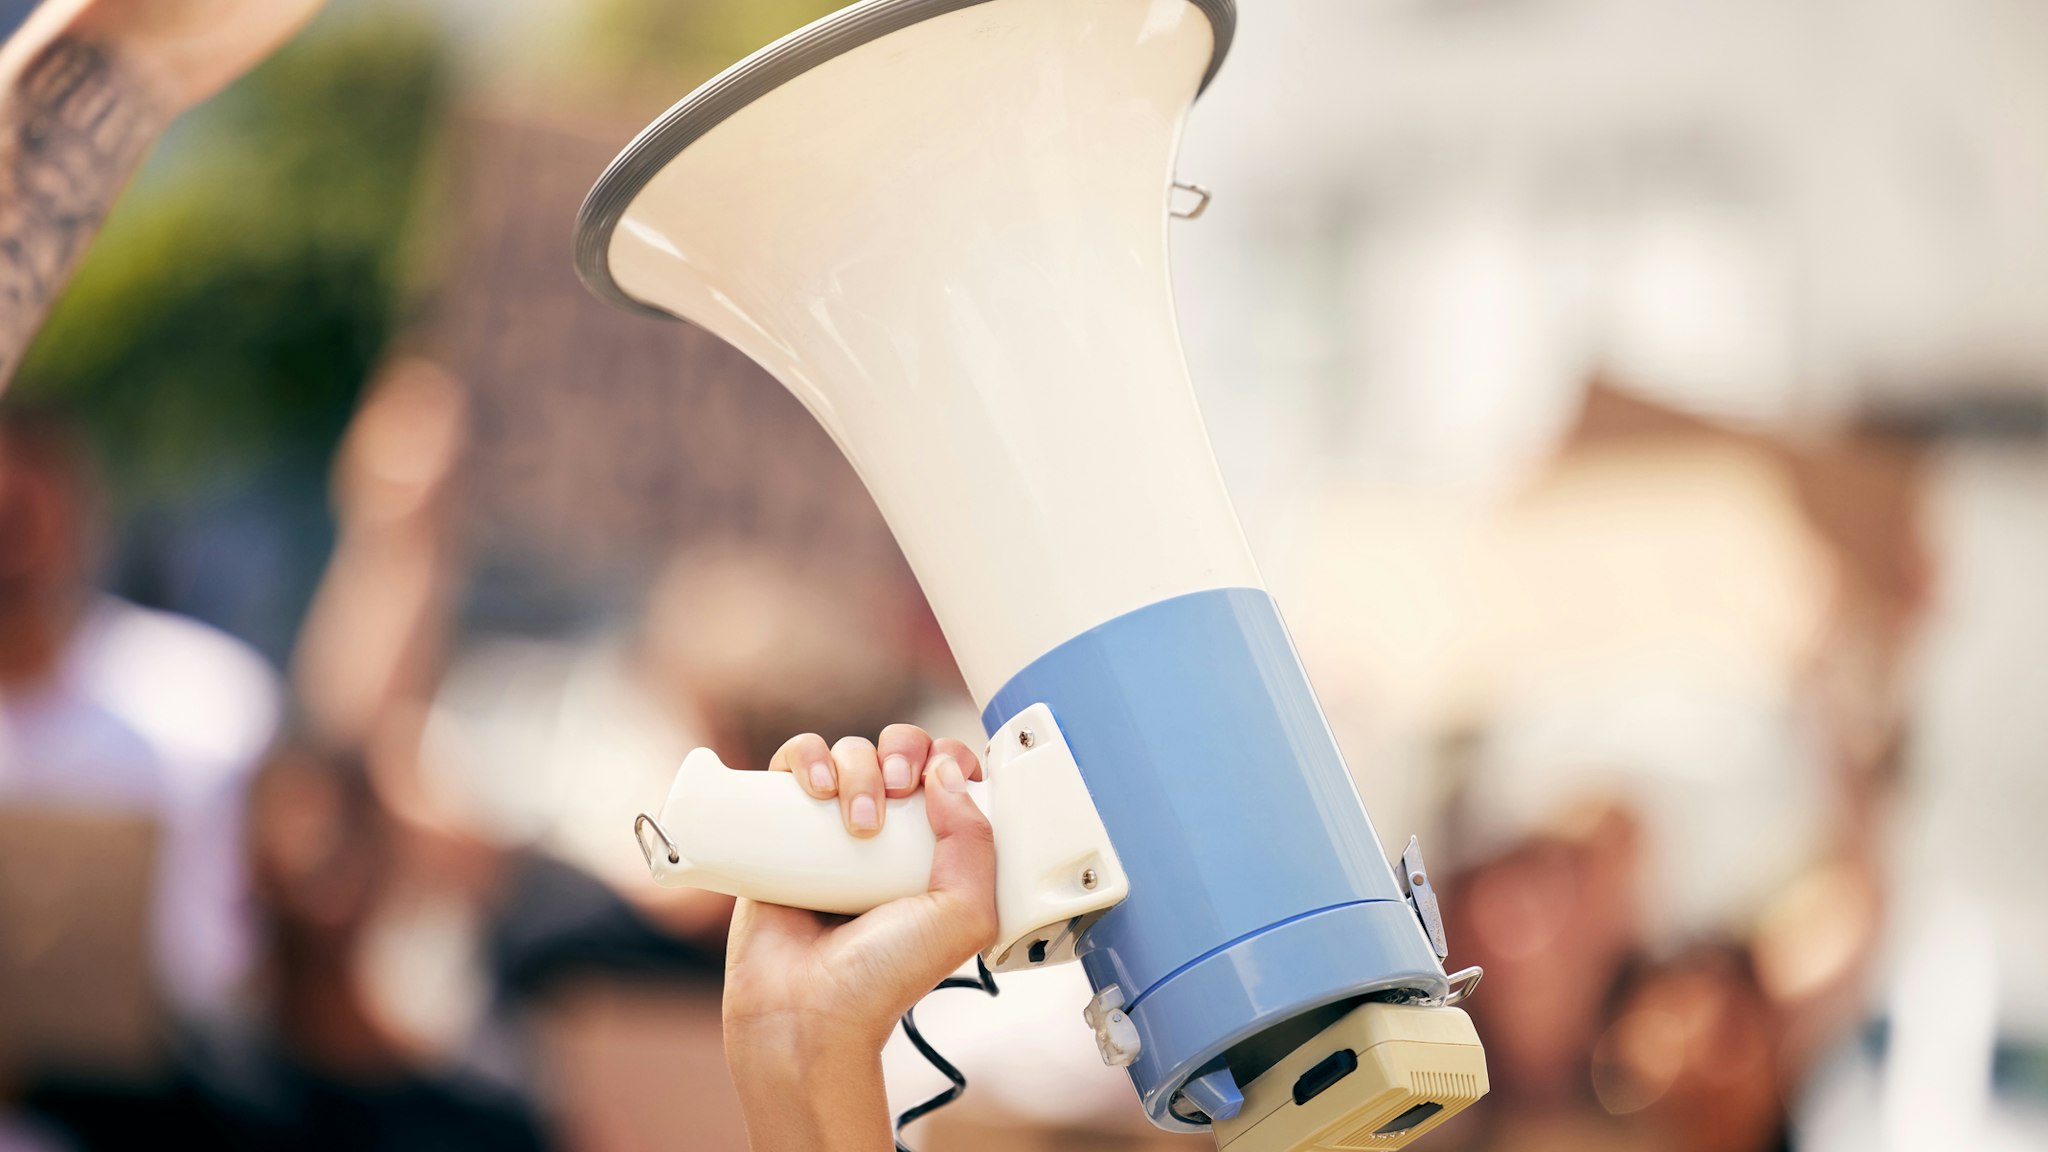 Shot of a protester holding a megaphone during a rally - stock photo